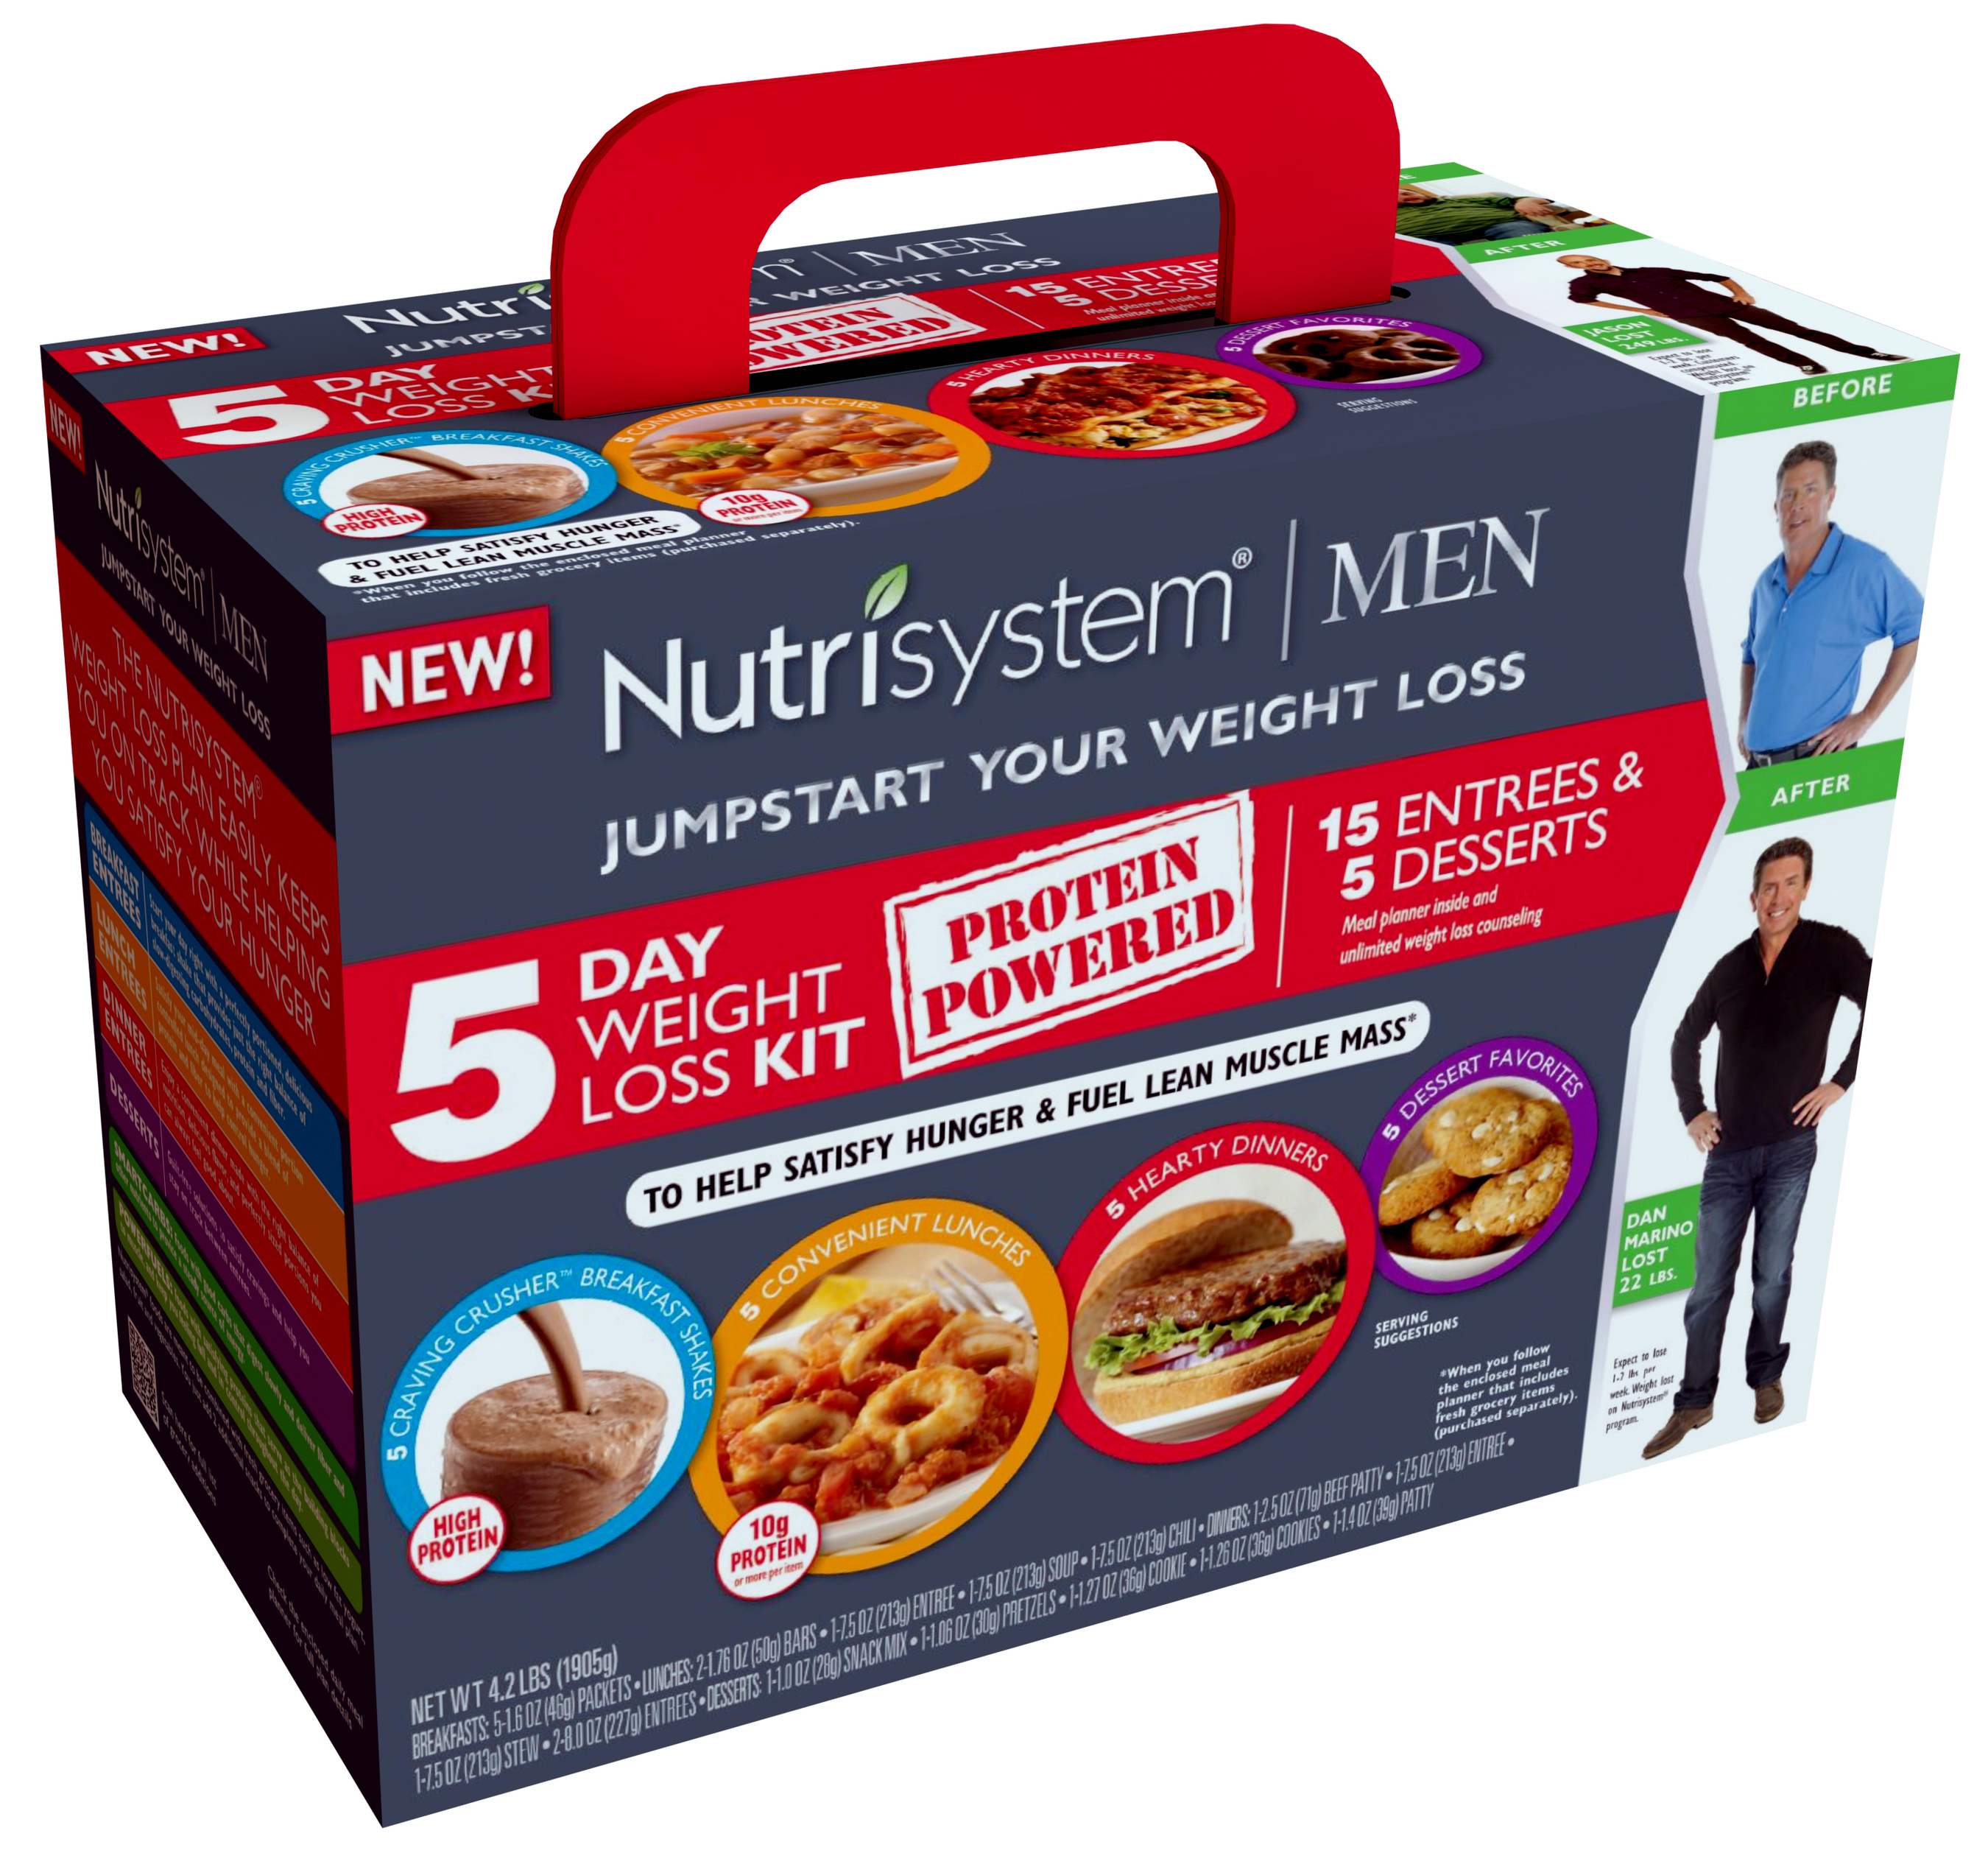 Nutrisystem introduces a new Men's Protein-Powered 5-Day Weight Loss Kit at retail. (PRNewsFoto/Nutrisystem, Inc.) (PRNewsFoto/Nutrisystem, Inc.)